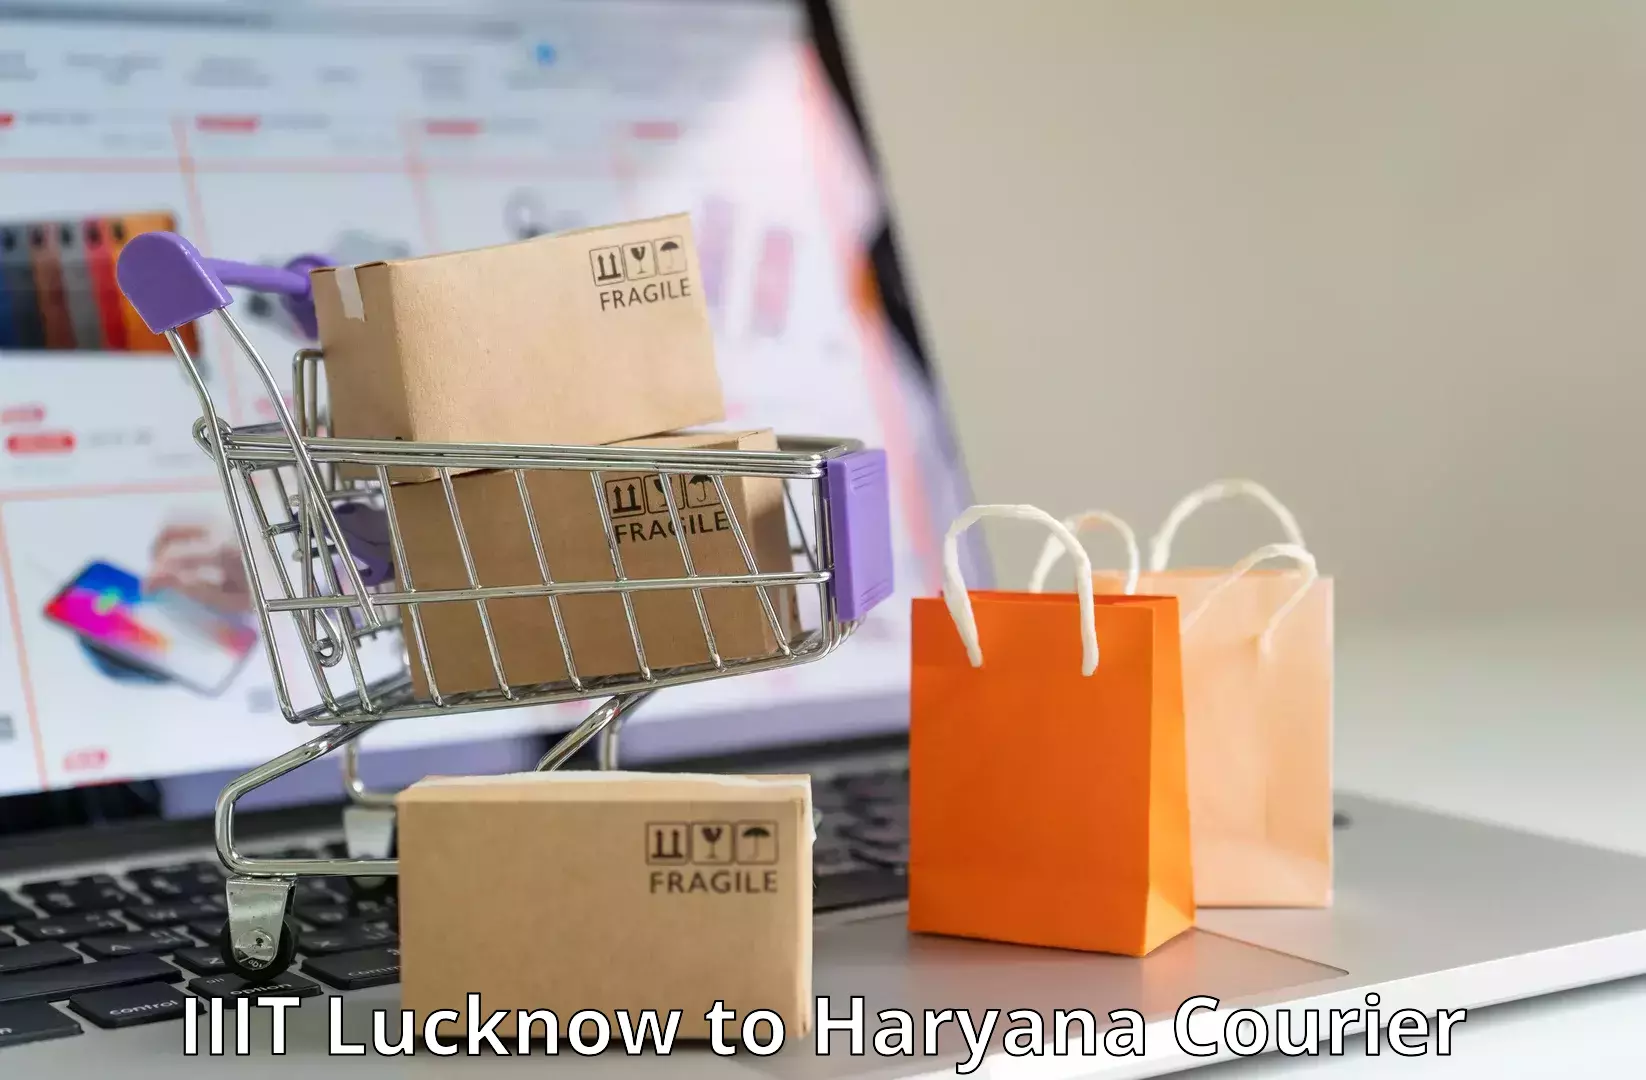 Quality courier services IIIT Lucknow to Faridabad